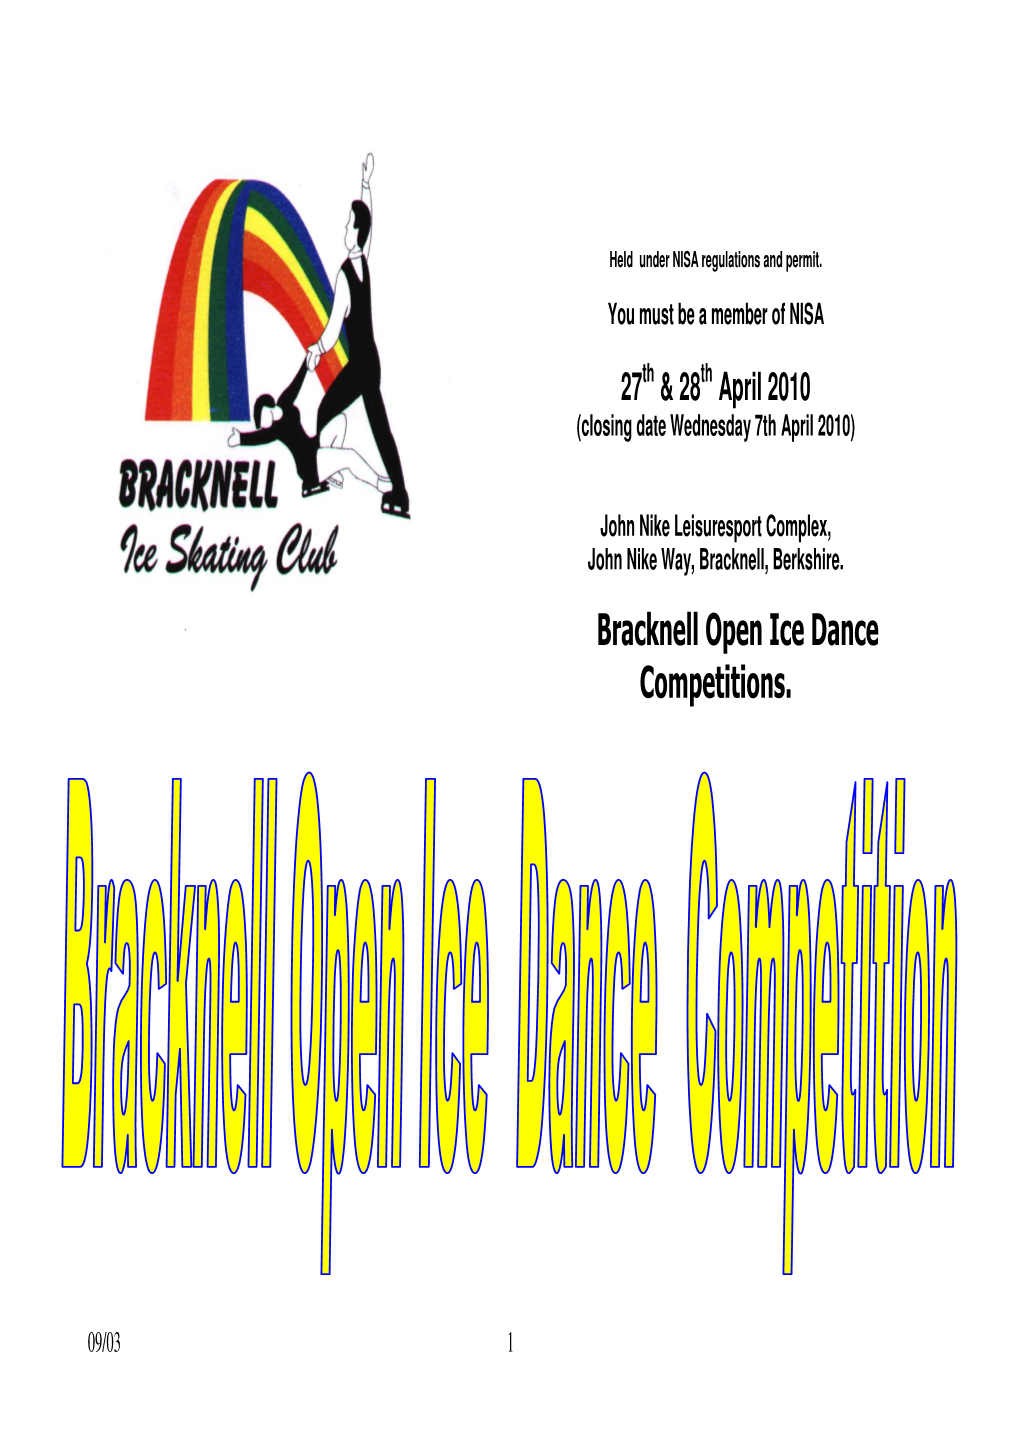 Bracknell Open Ice Dance Competitions